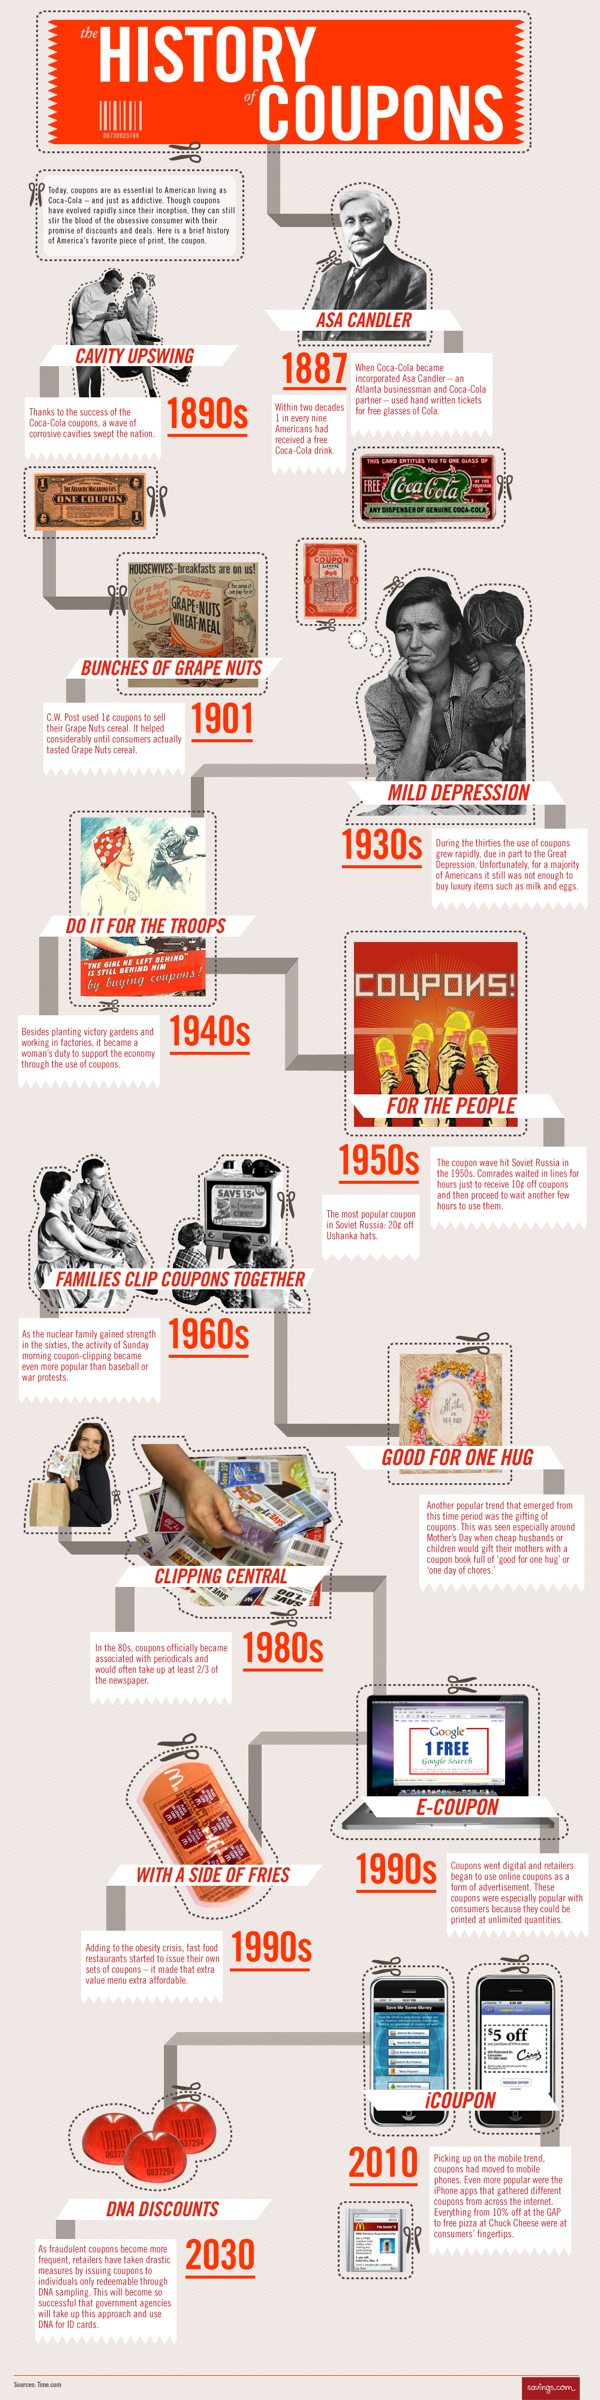  The History of Coupons